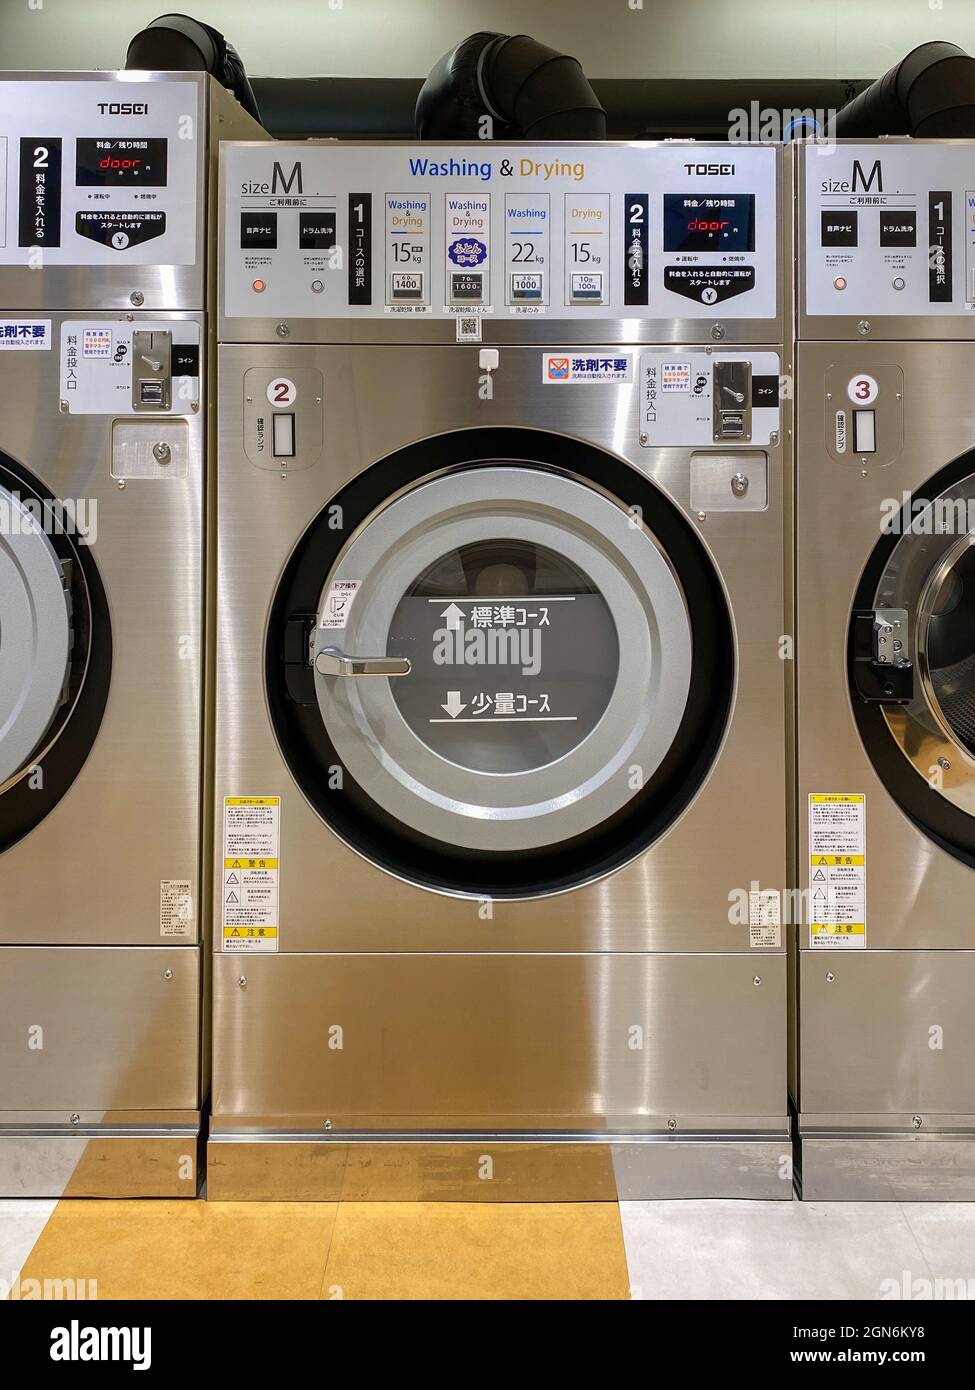 Tokyo, Japan - 23 November 2019: Local laundromat used for public use to wash laundry in Tokyo, Japan Stock Photo